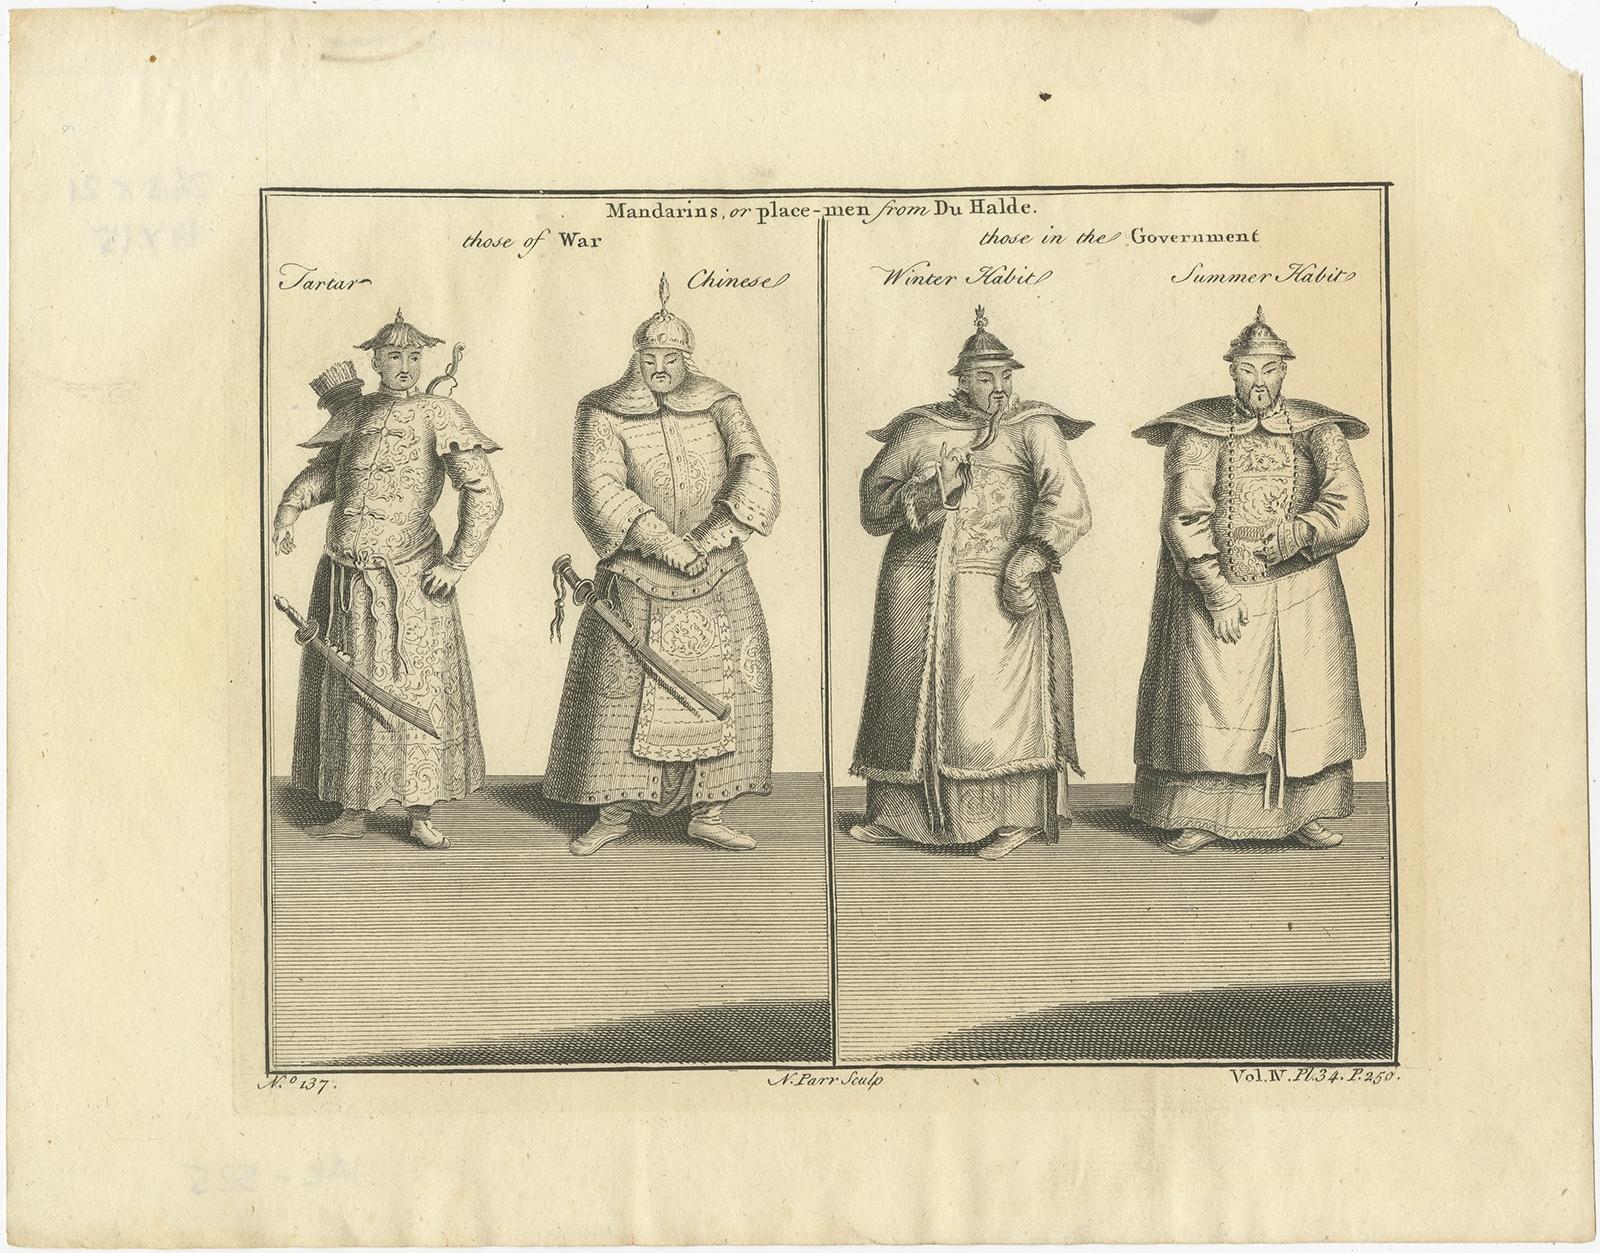 Antique print titled 'Mandarins, or place-men from Du Halde'. 

Print of Chinese men and their costumes. This print originates from 'A New General Collection of Voyages and Travels' by Thomas Astley. 

Artists and Engravers: Engraved by N. Parr.